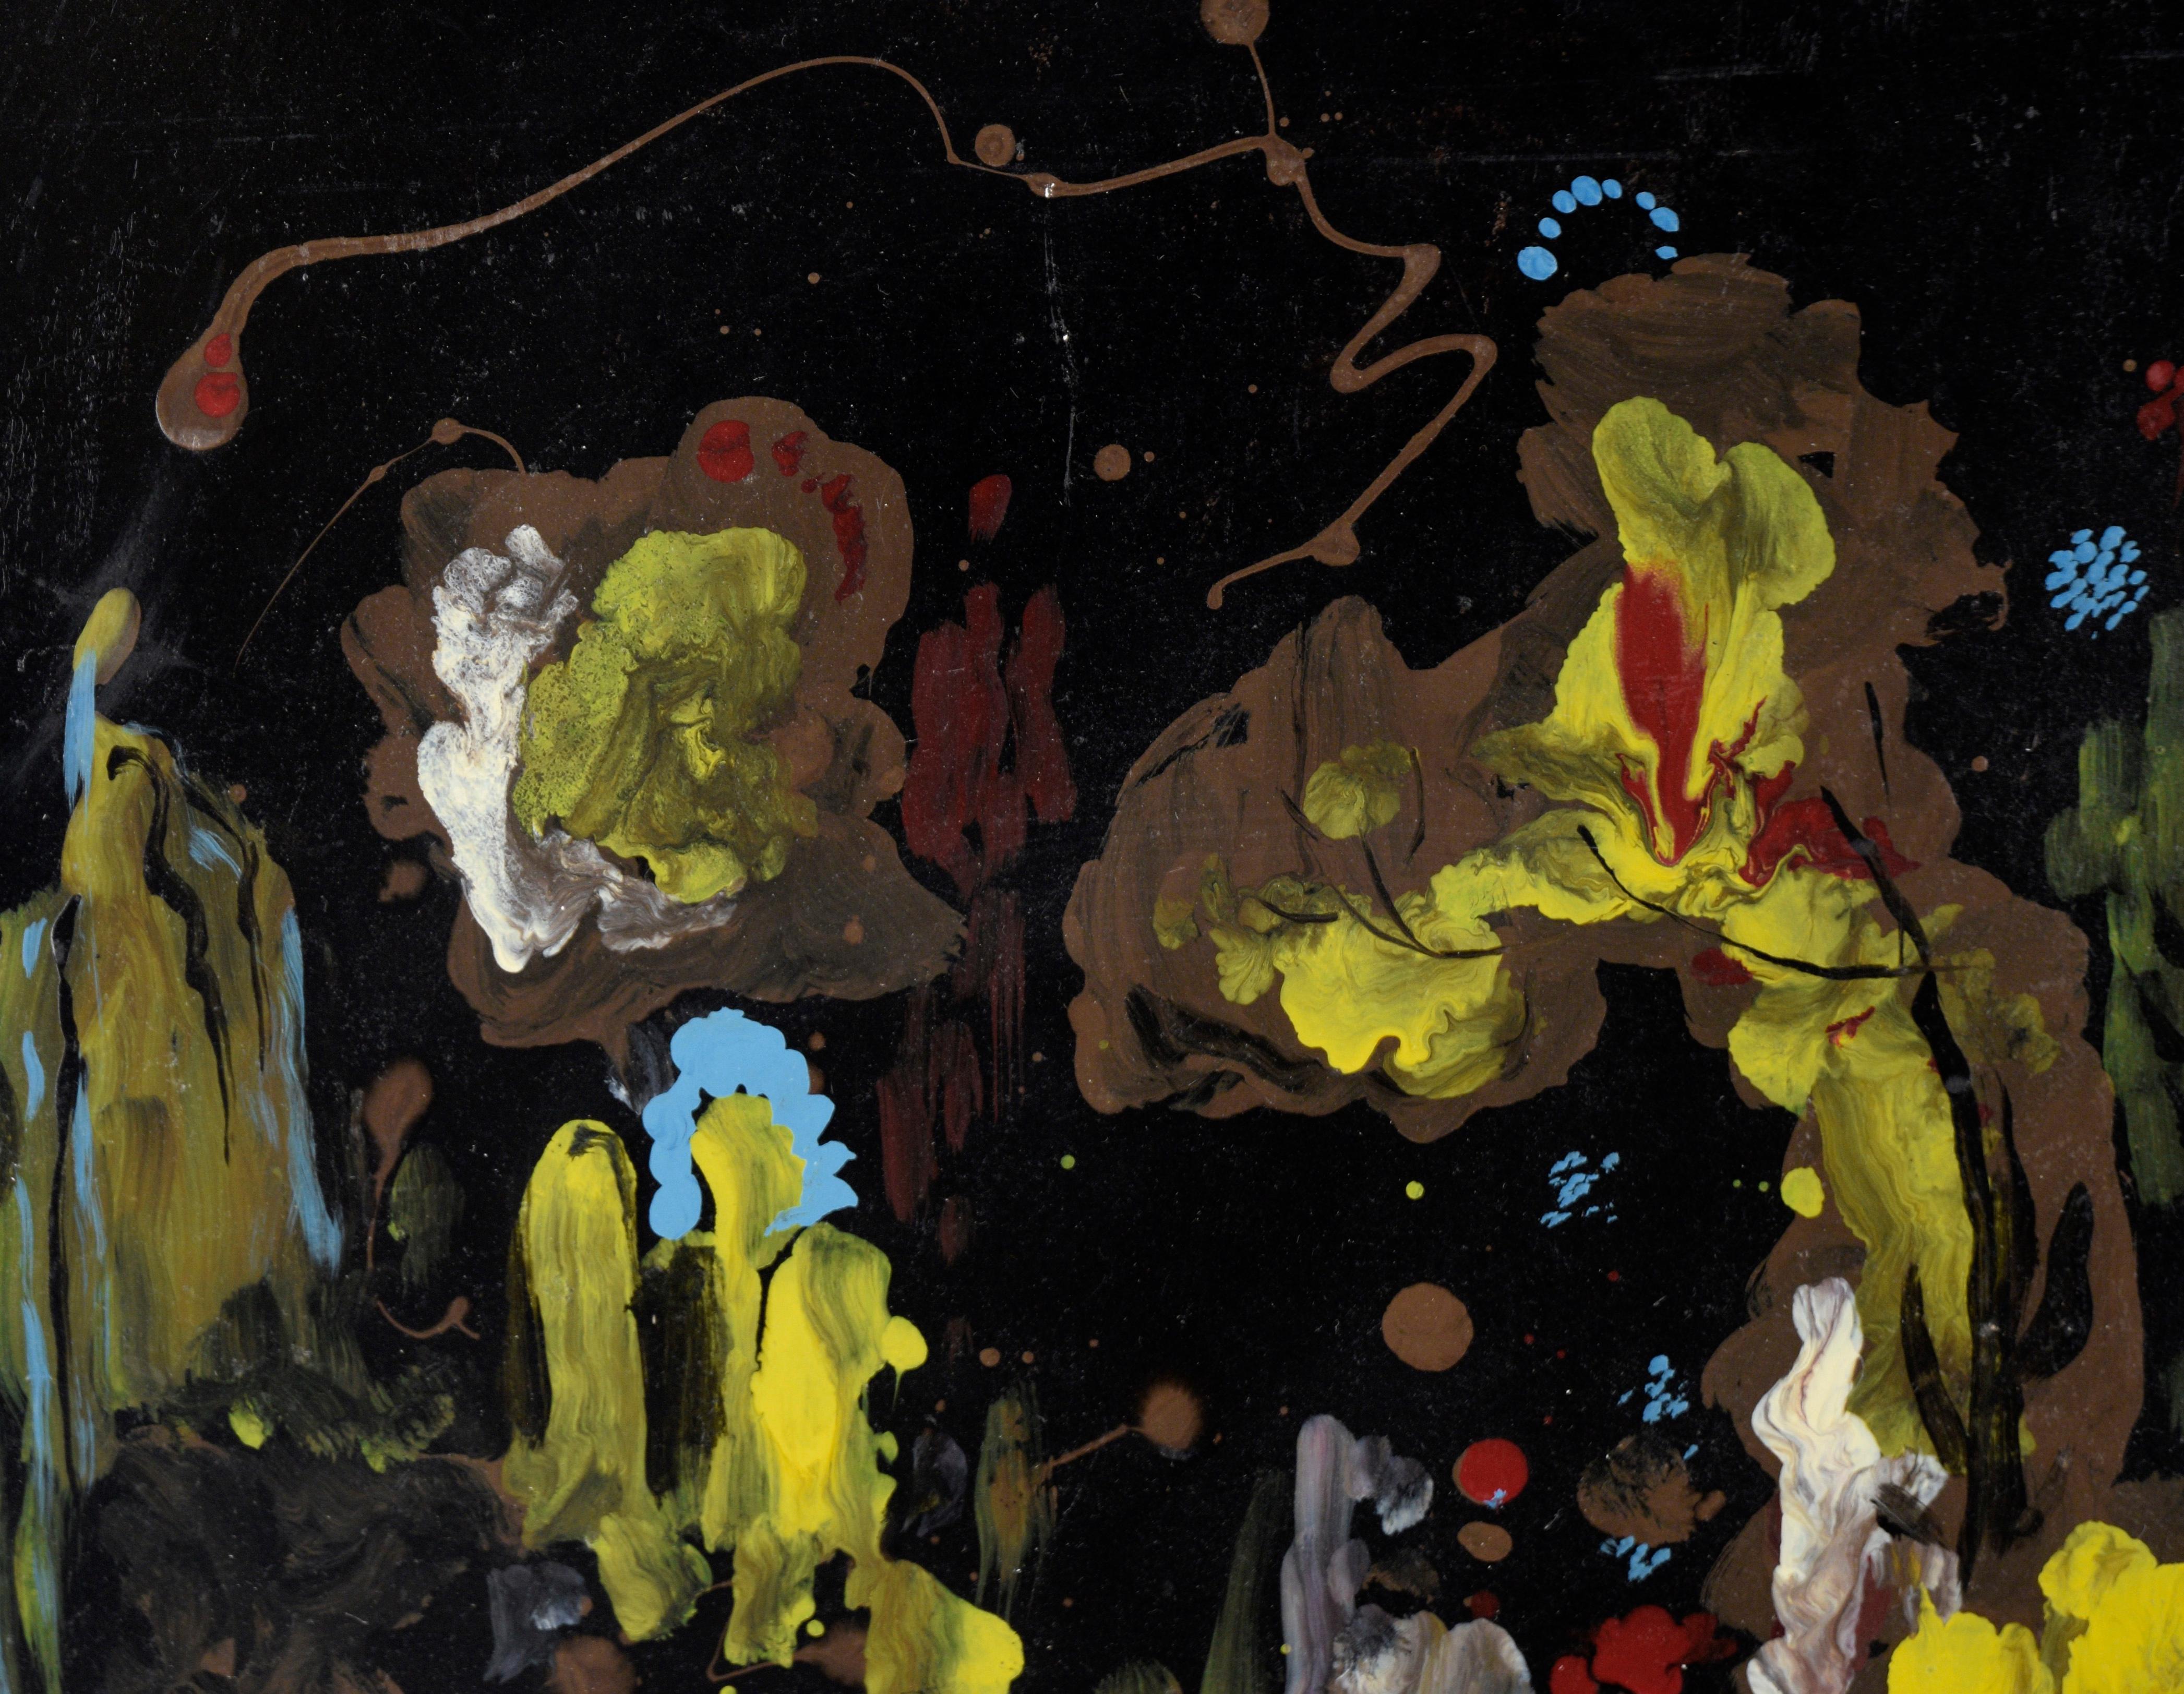 Coral Bouquet - Abstracted Underwater Scene in Acrylic on Masonite

High contrast abstract composition by an unknown artist (20th Century). Vibrant scene composed of abstract shapes that resemble a coral reef. Bright yellow and blue splashes swirl